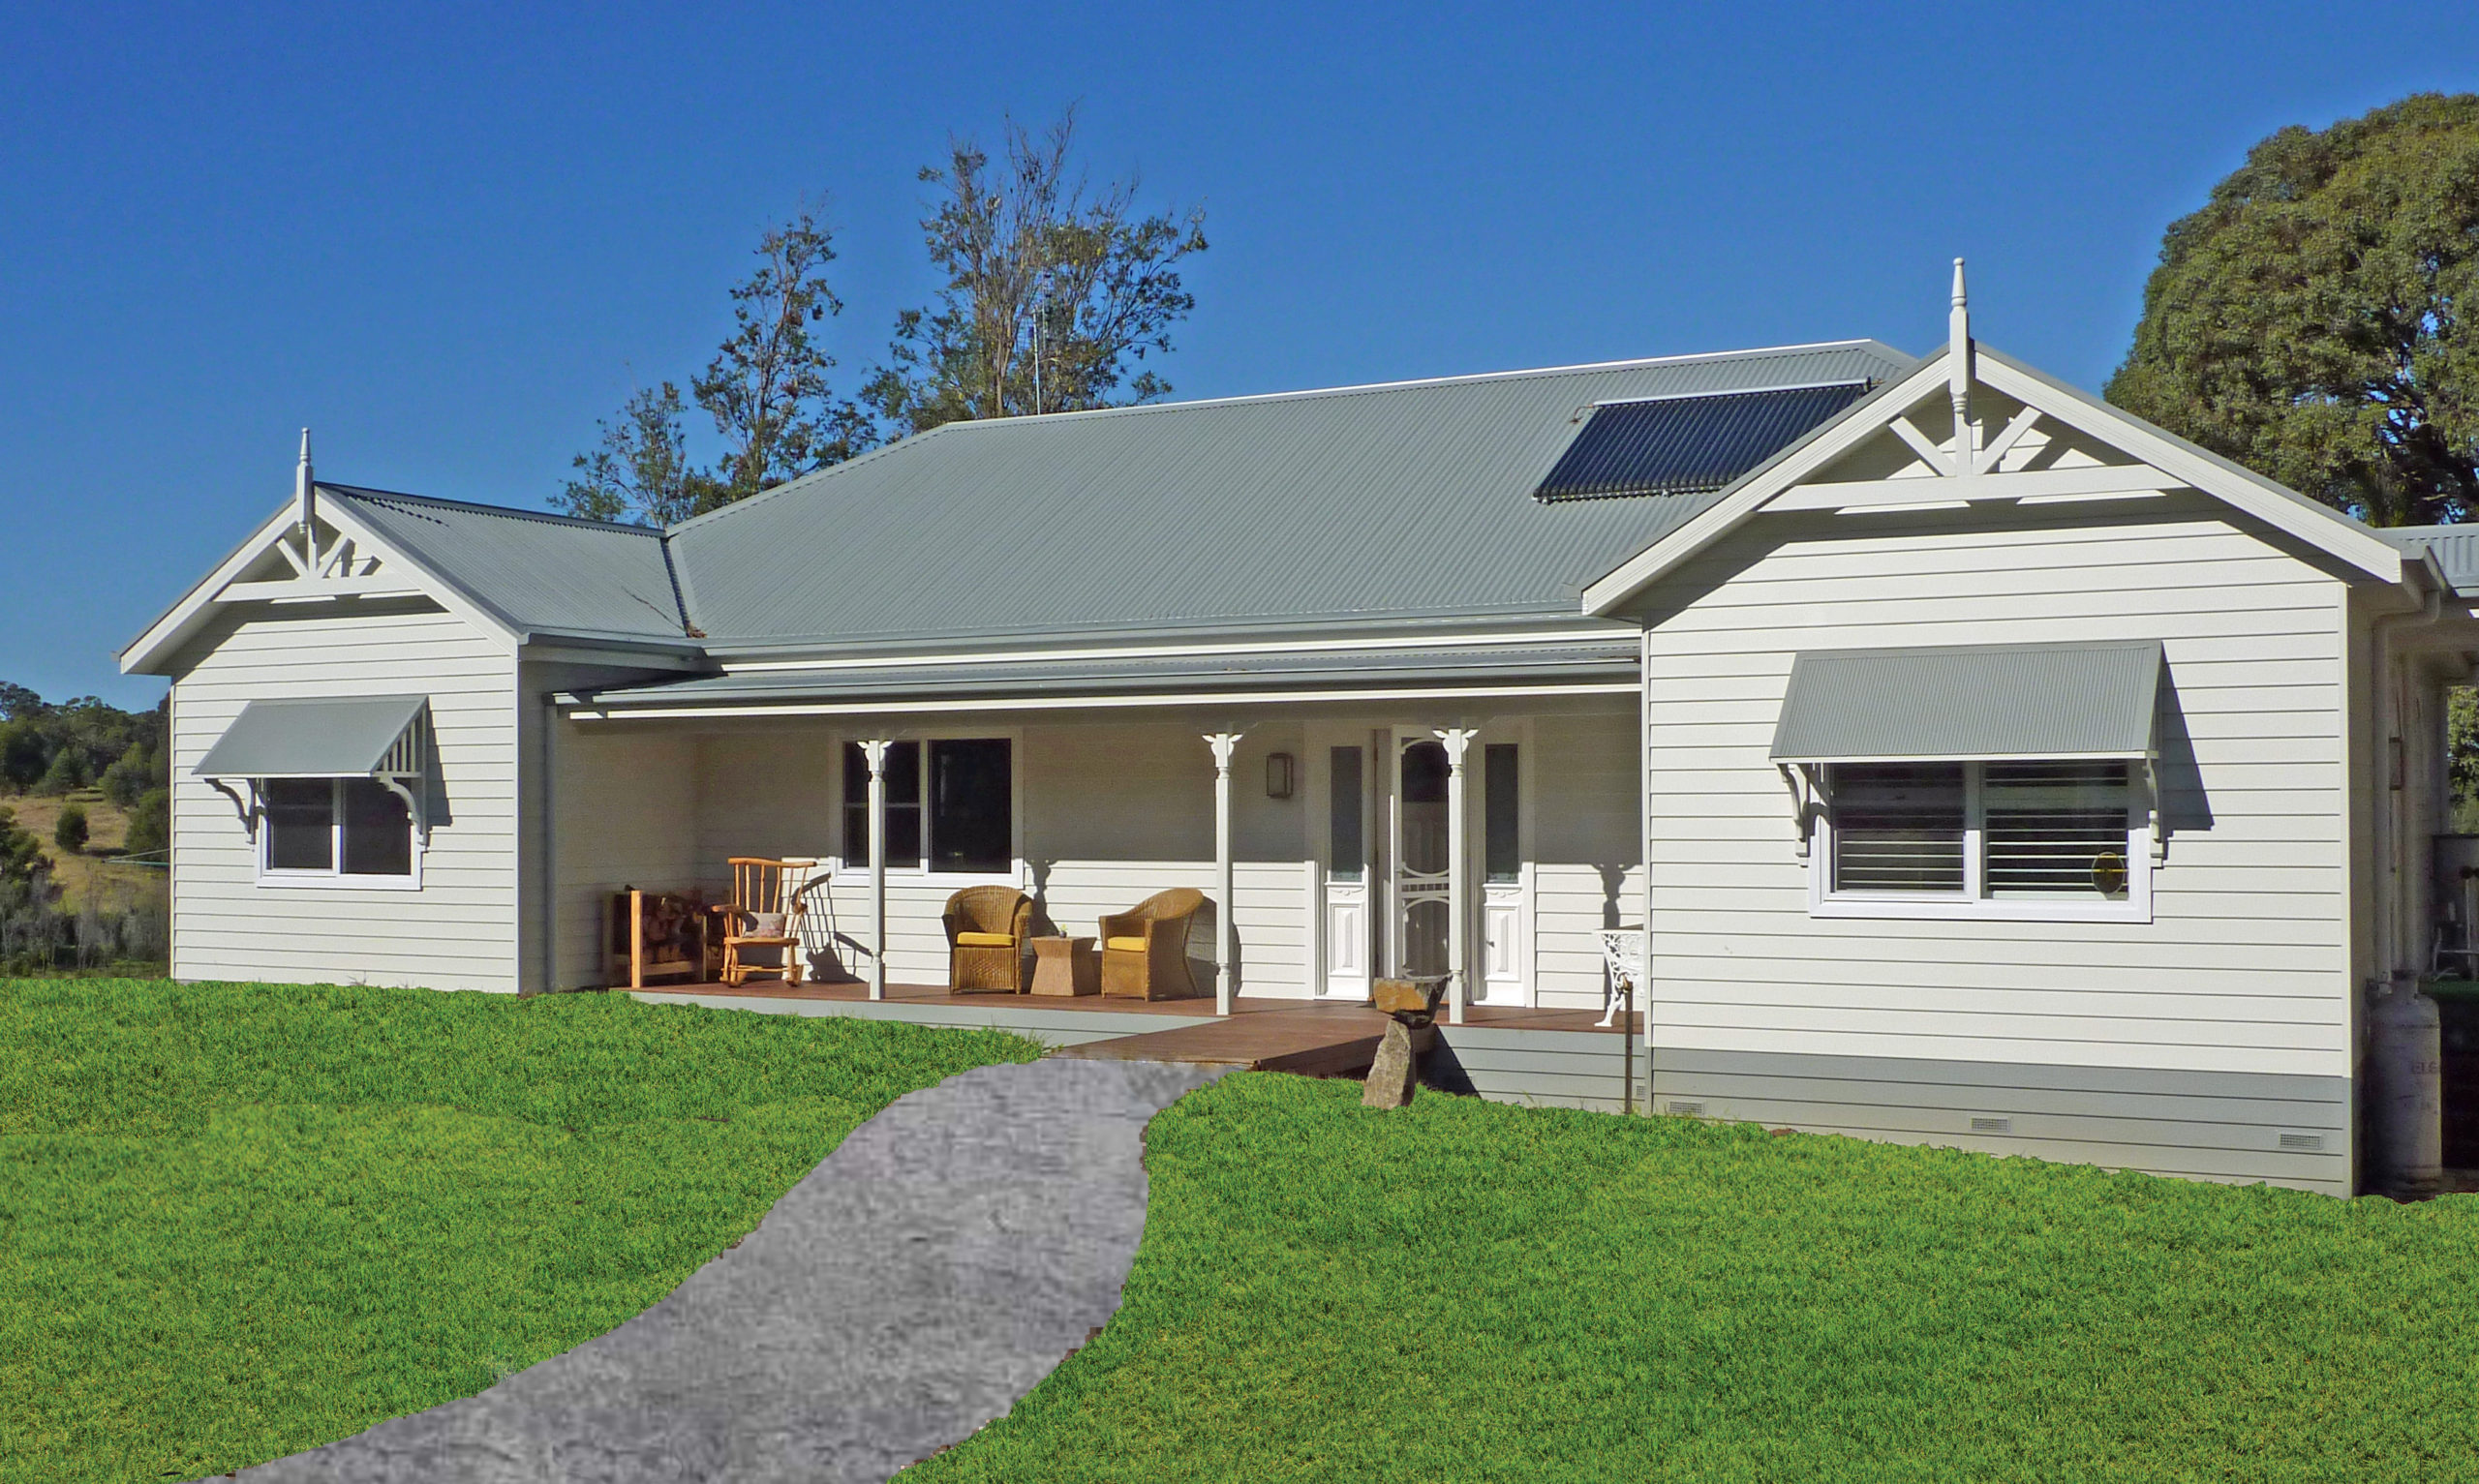 Briarose - country cottage energy efficient home with north facing porch built by Farm Houses of Australia